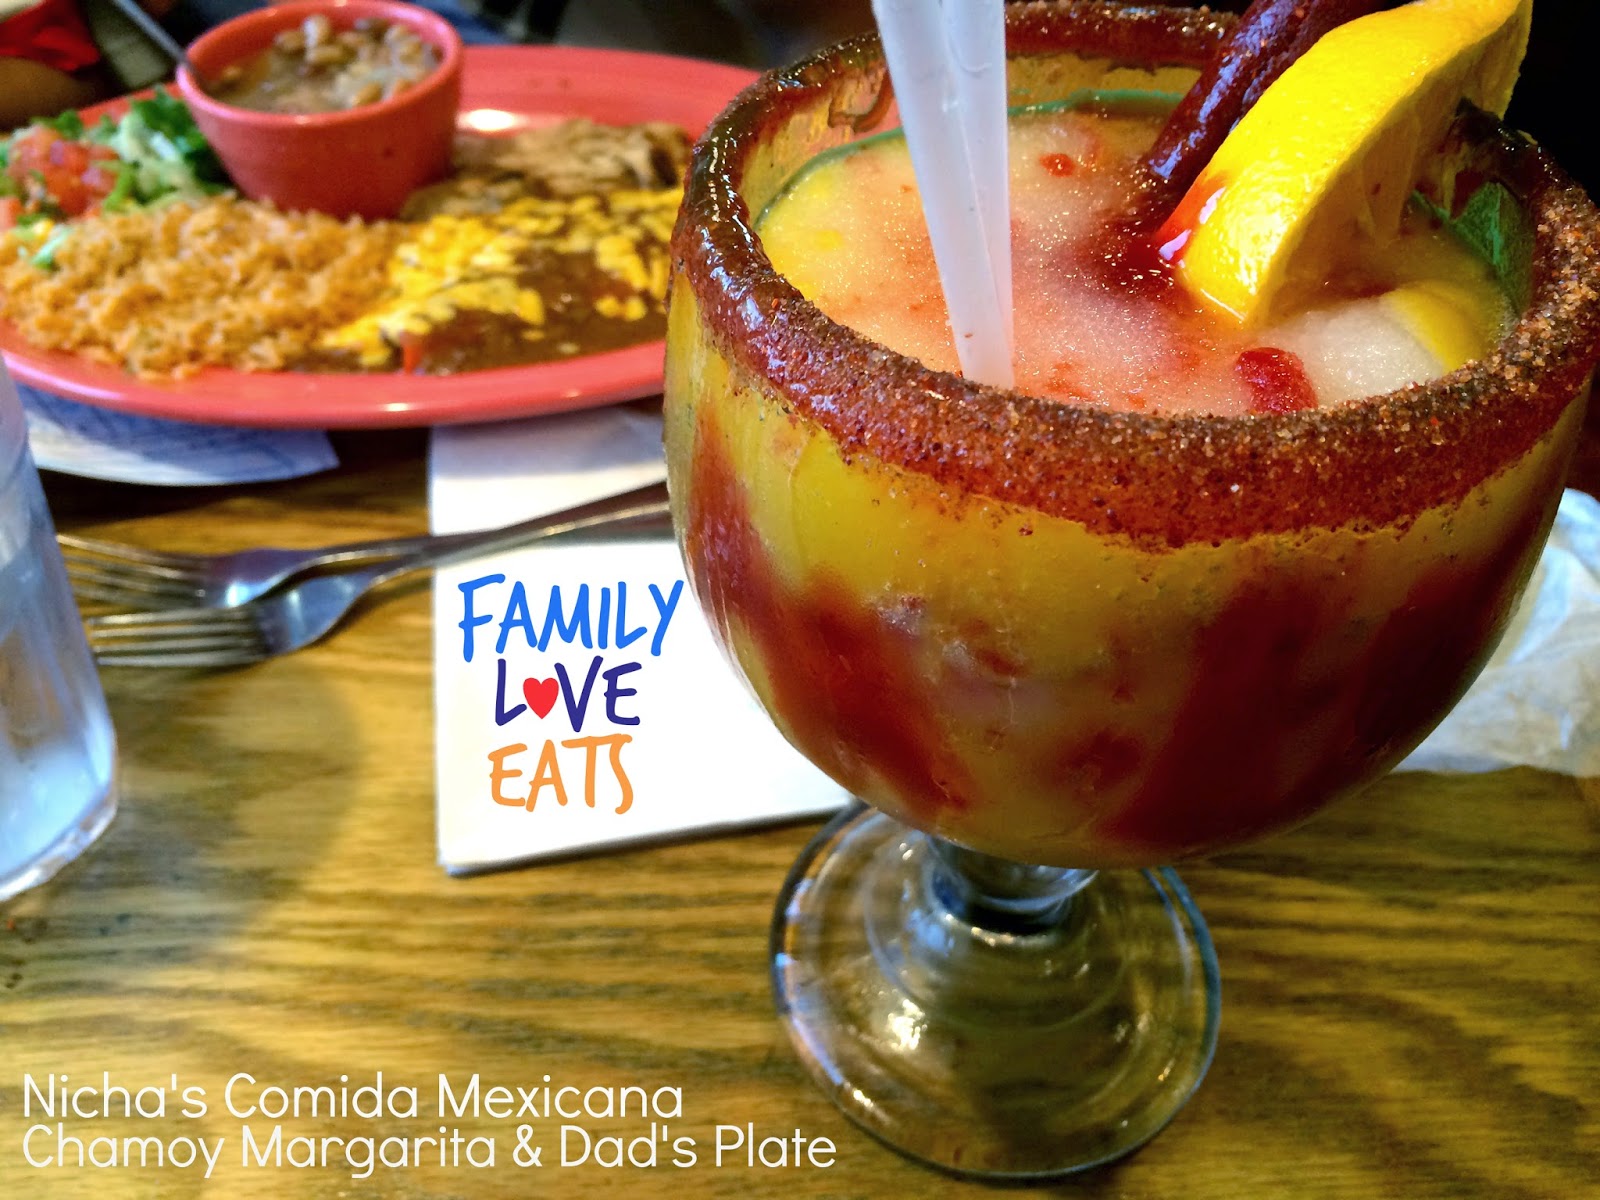 Authentic Mexican Food Near the San Antonio Historic Missions - Kids Eat Free